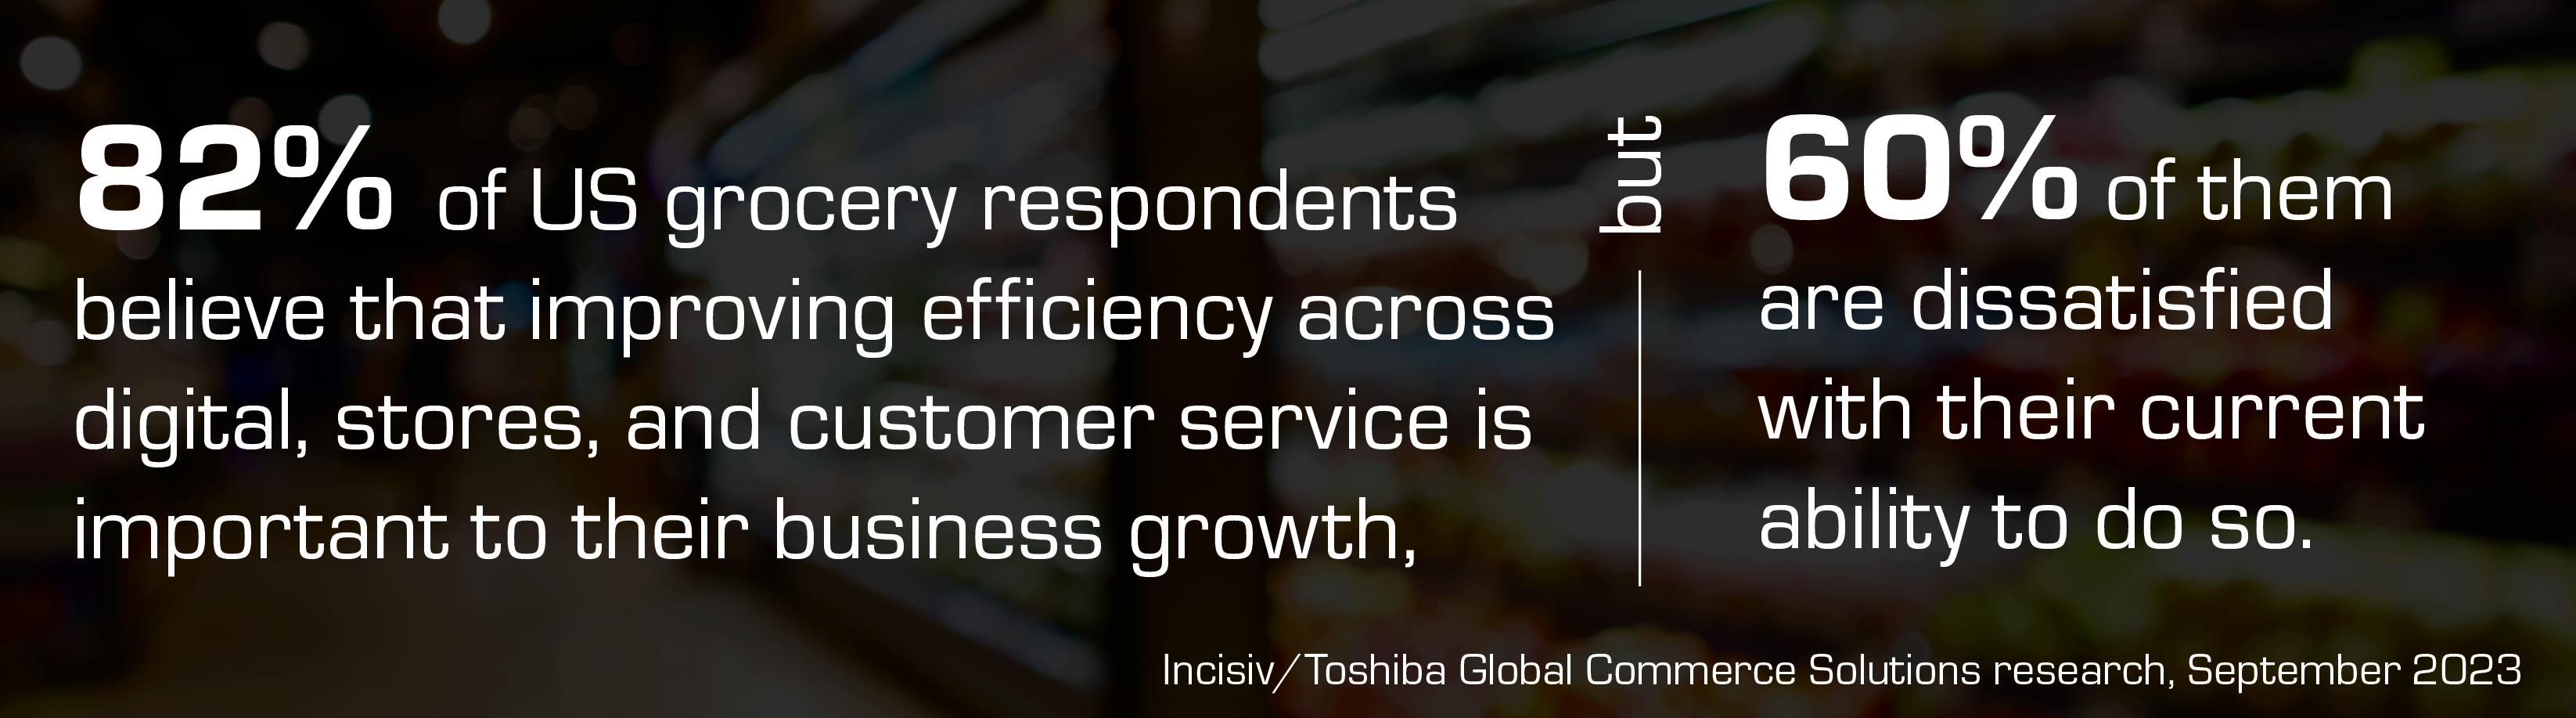 82% of US grocery agree that improving digital efficiency across stores is important